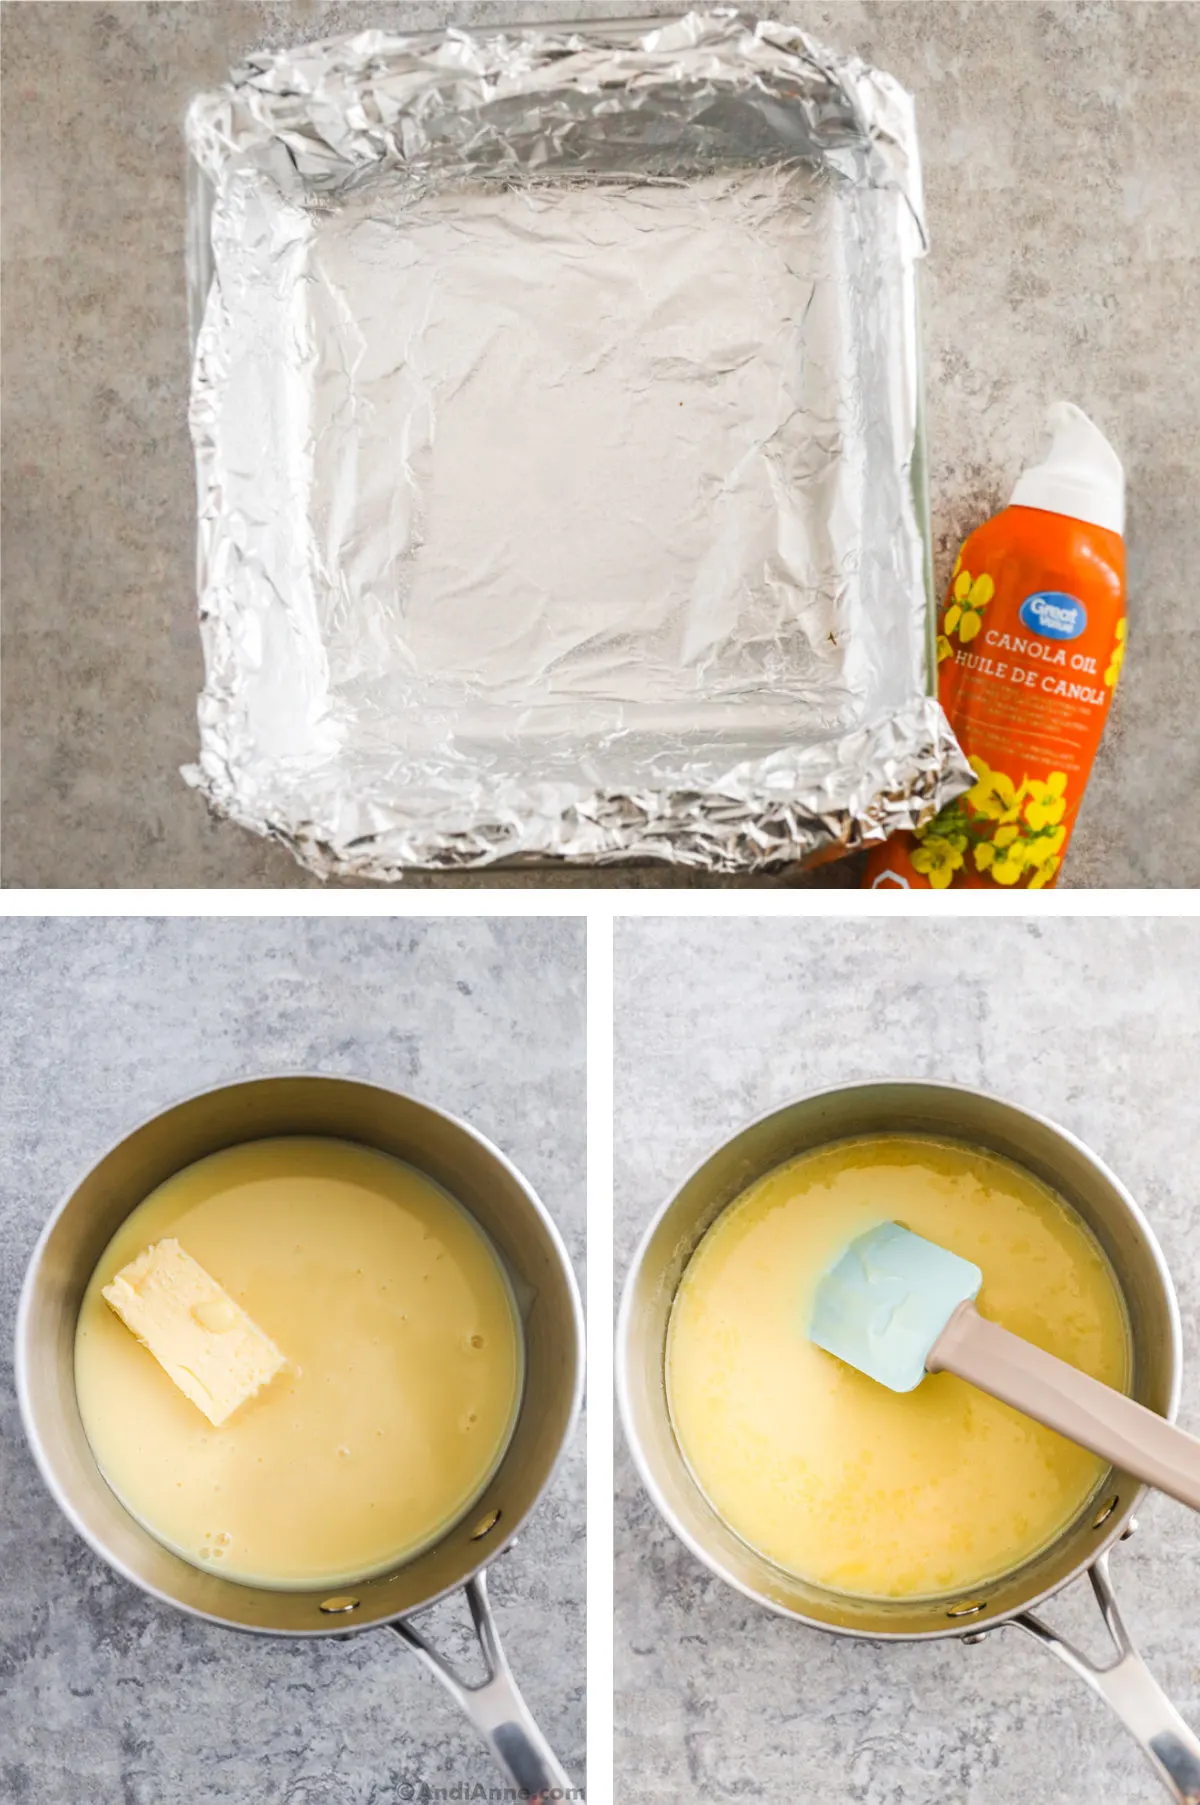 Three overhead images in one: 1. 8x8 inch pan lined with foil. A non stick cooking spray can to the side. 2. Steel pot with butter added to sweetened condensed milk. 3. Butter is melted in sweetened condensed milk.